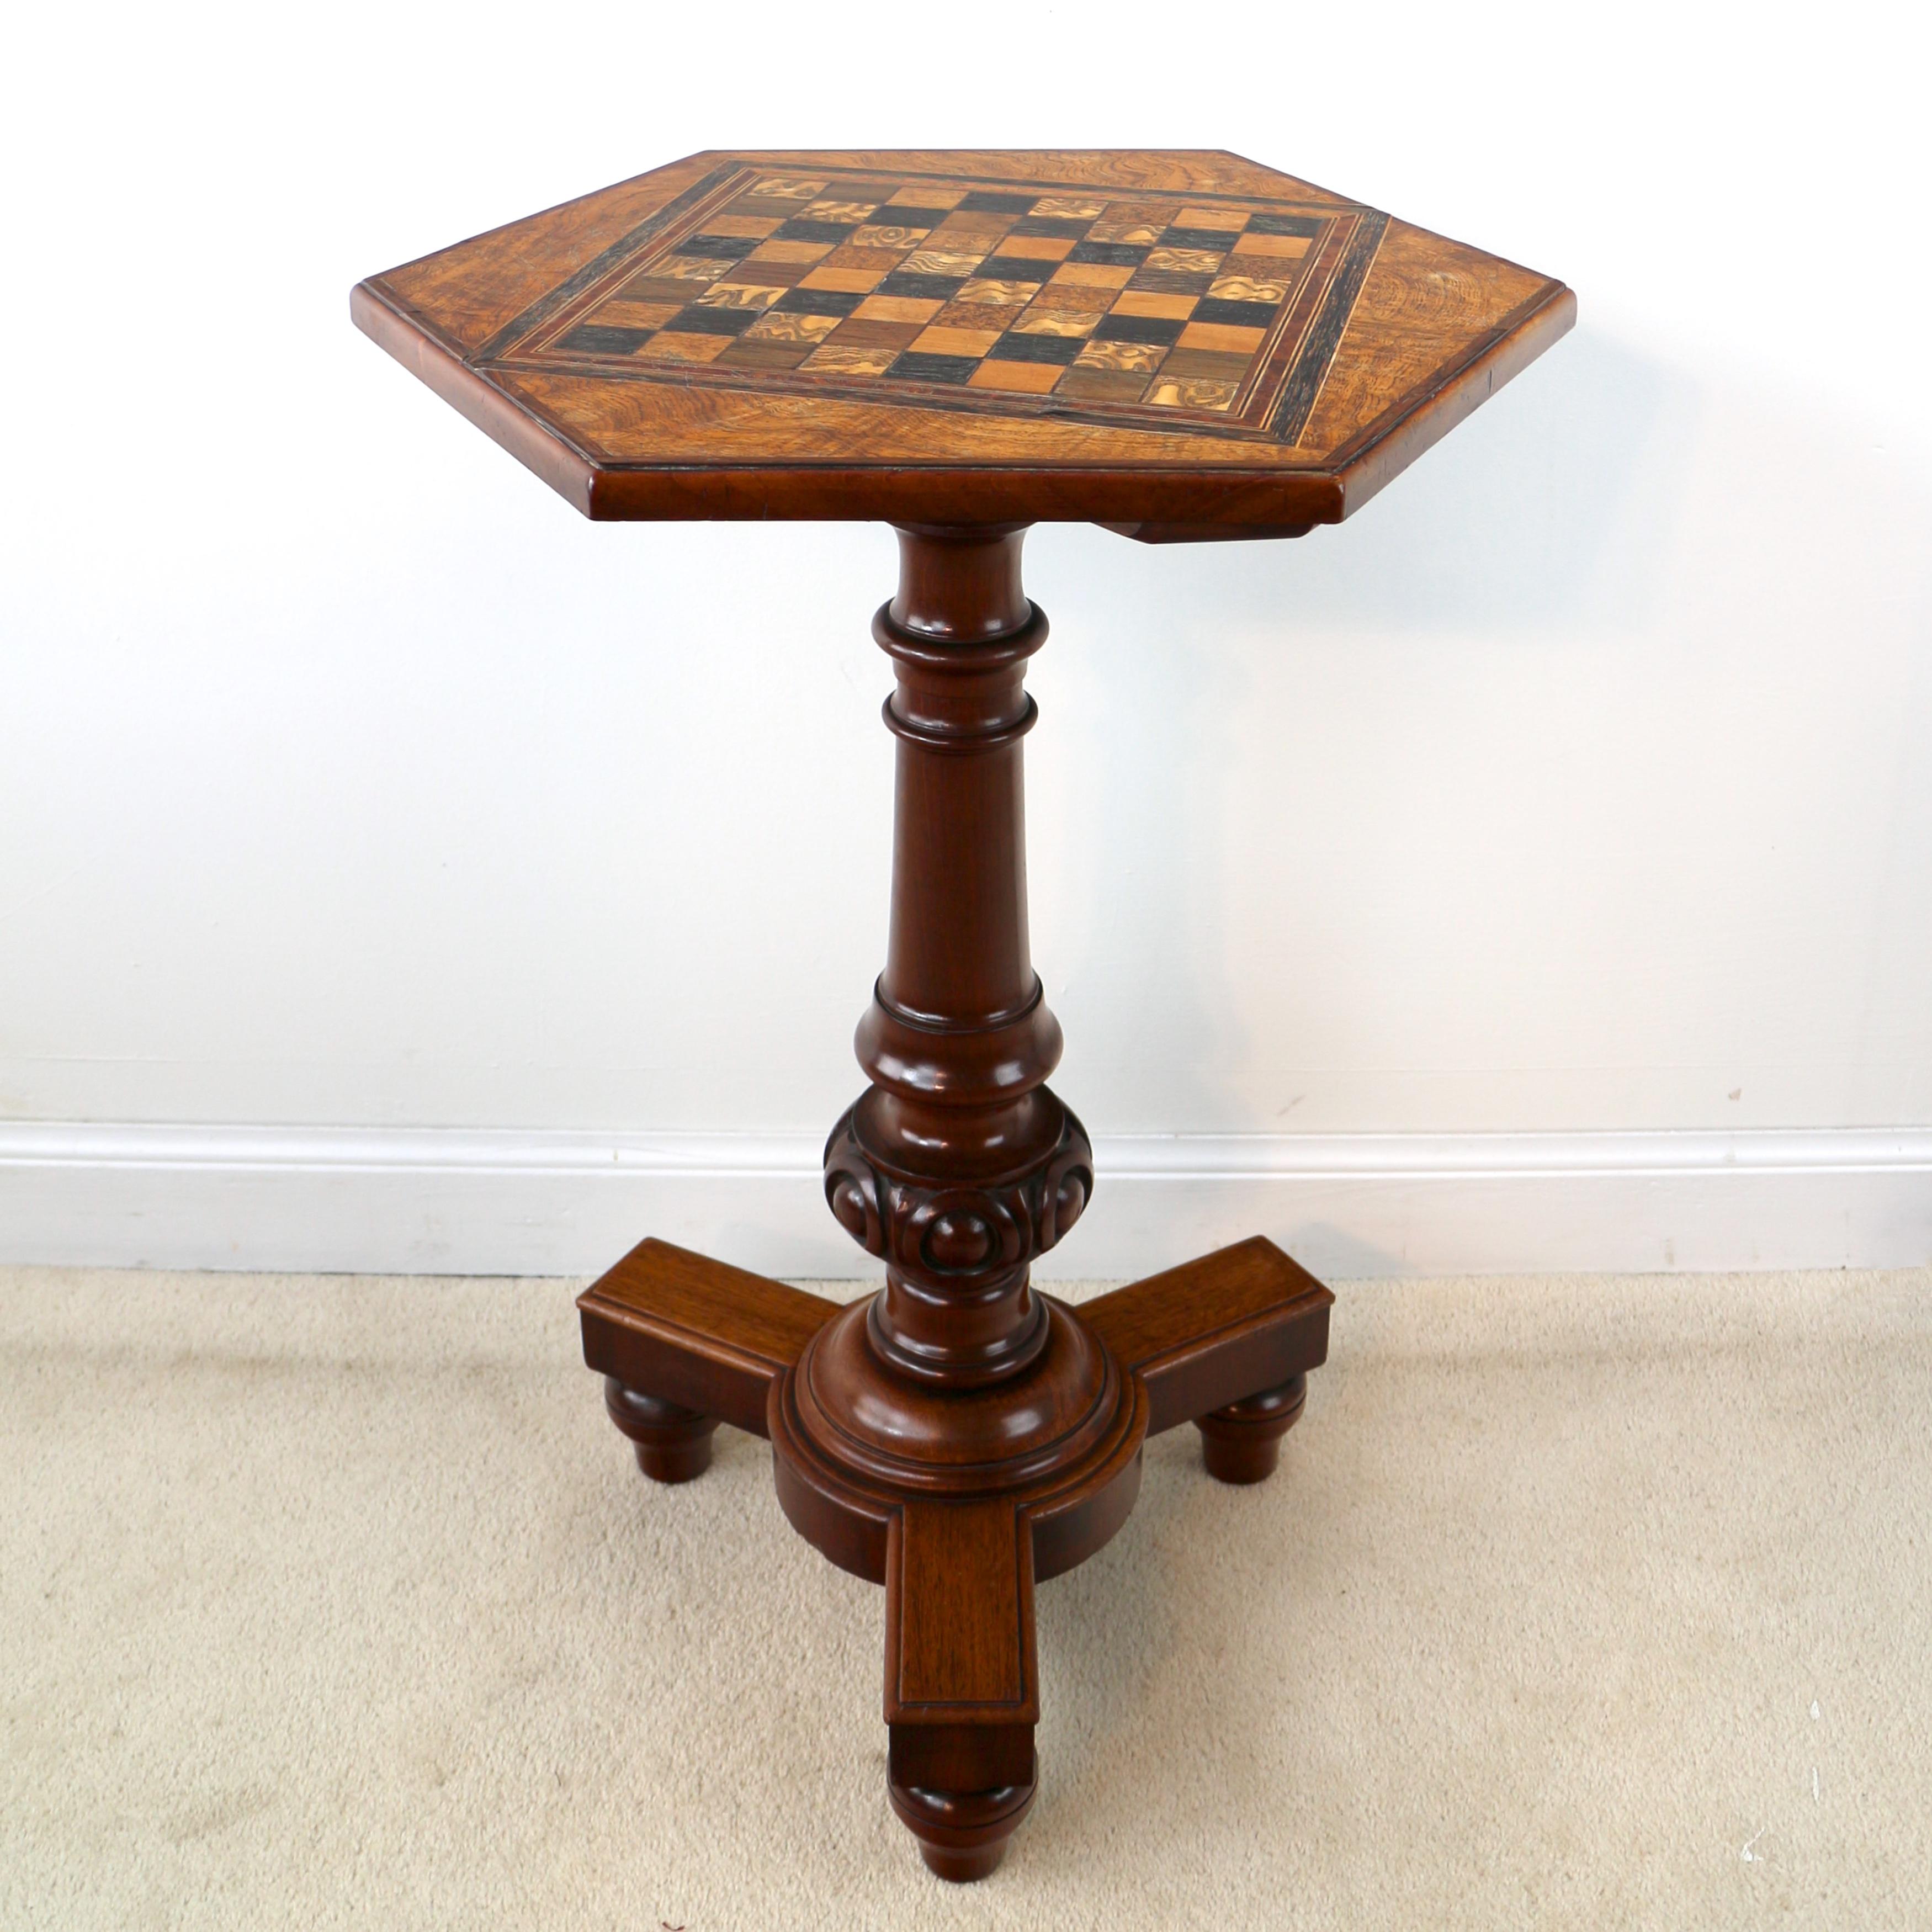 Rare 19th century pollard oak specimen chess or games table, the hexagonal shaped top inlaid with chequers in prized specimen veneers including ebony, Coromandel, rosewood, thuya, satinwood and burr elm and banded with amboyna and Coromandel with